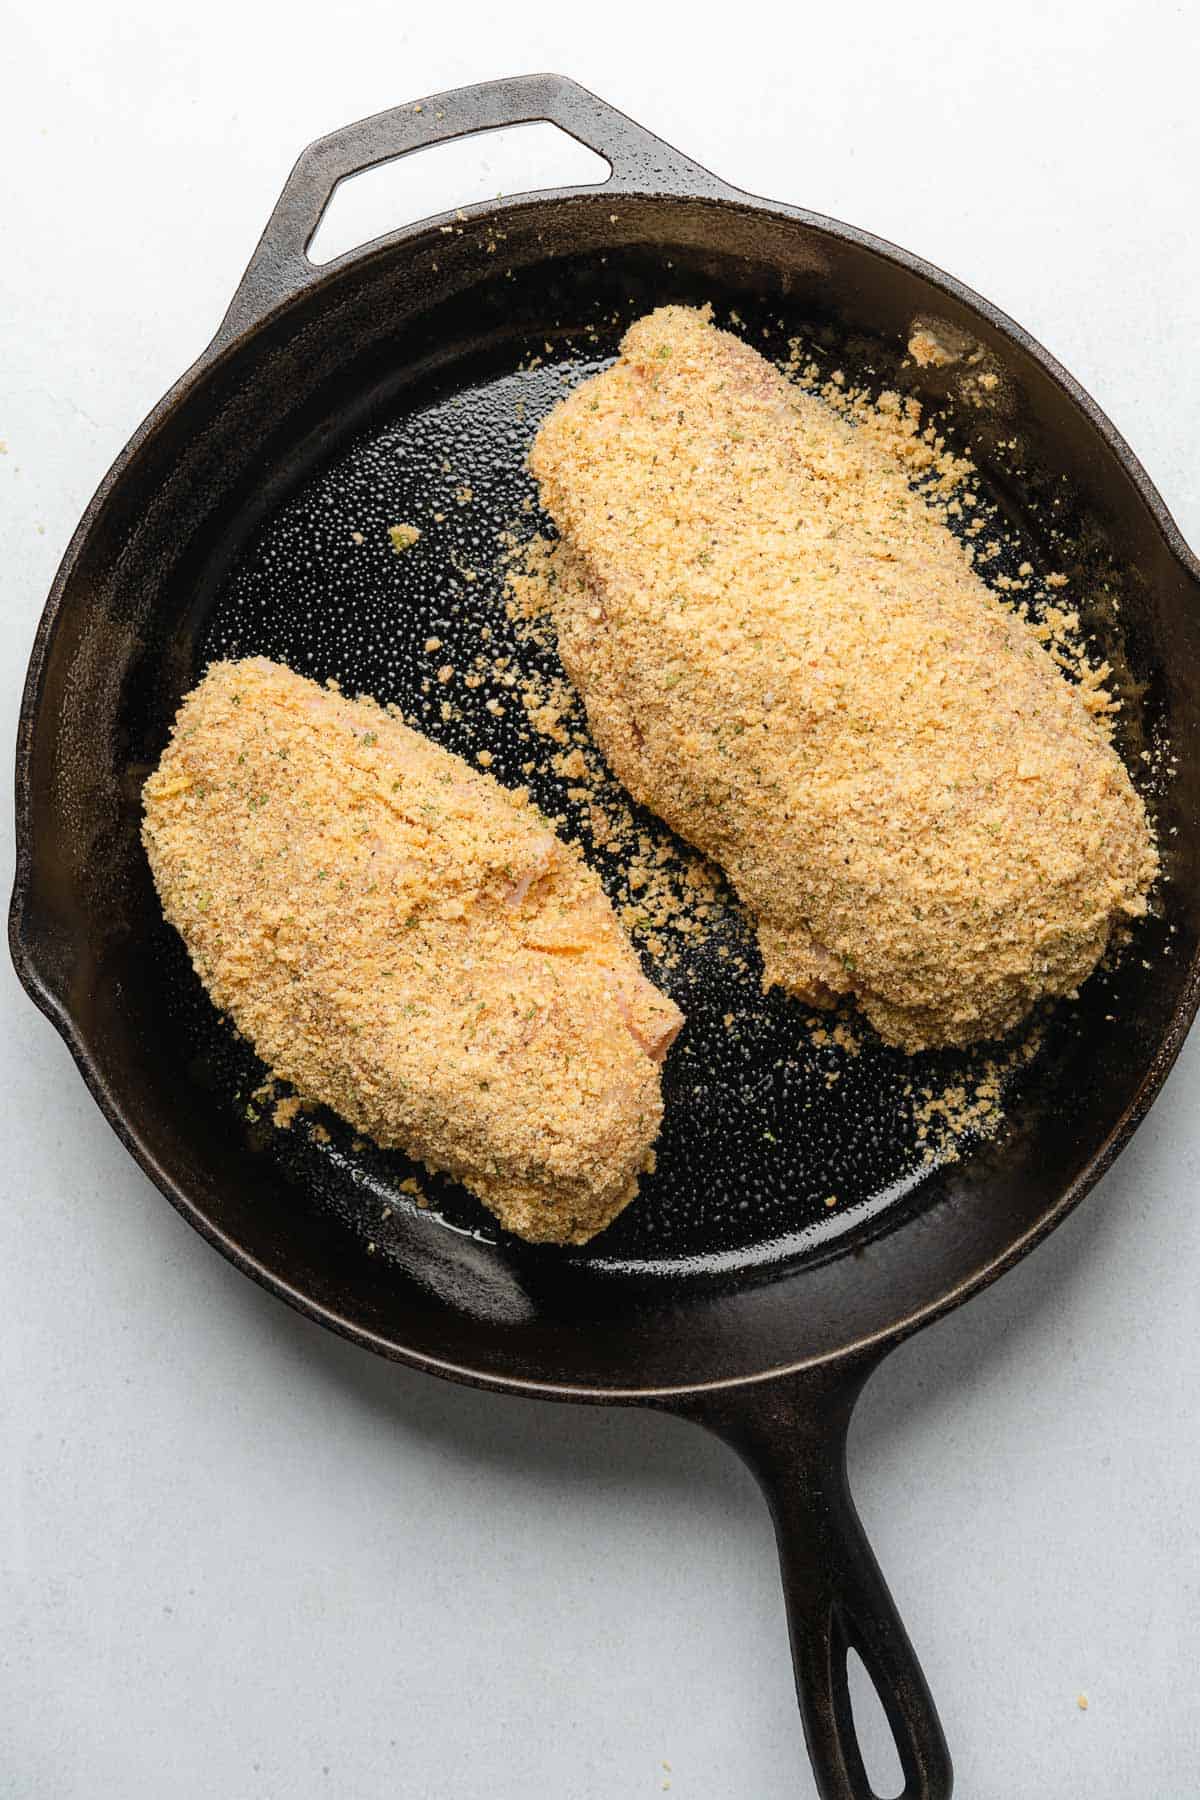 raw chicken breasts coated in pork rind crumbs in a cast iron skillet